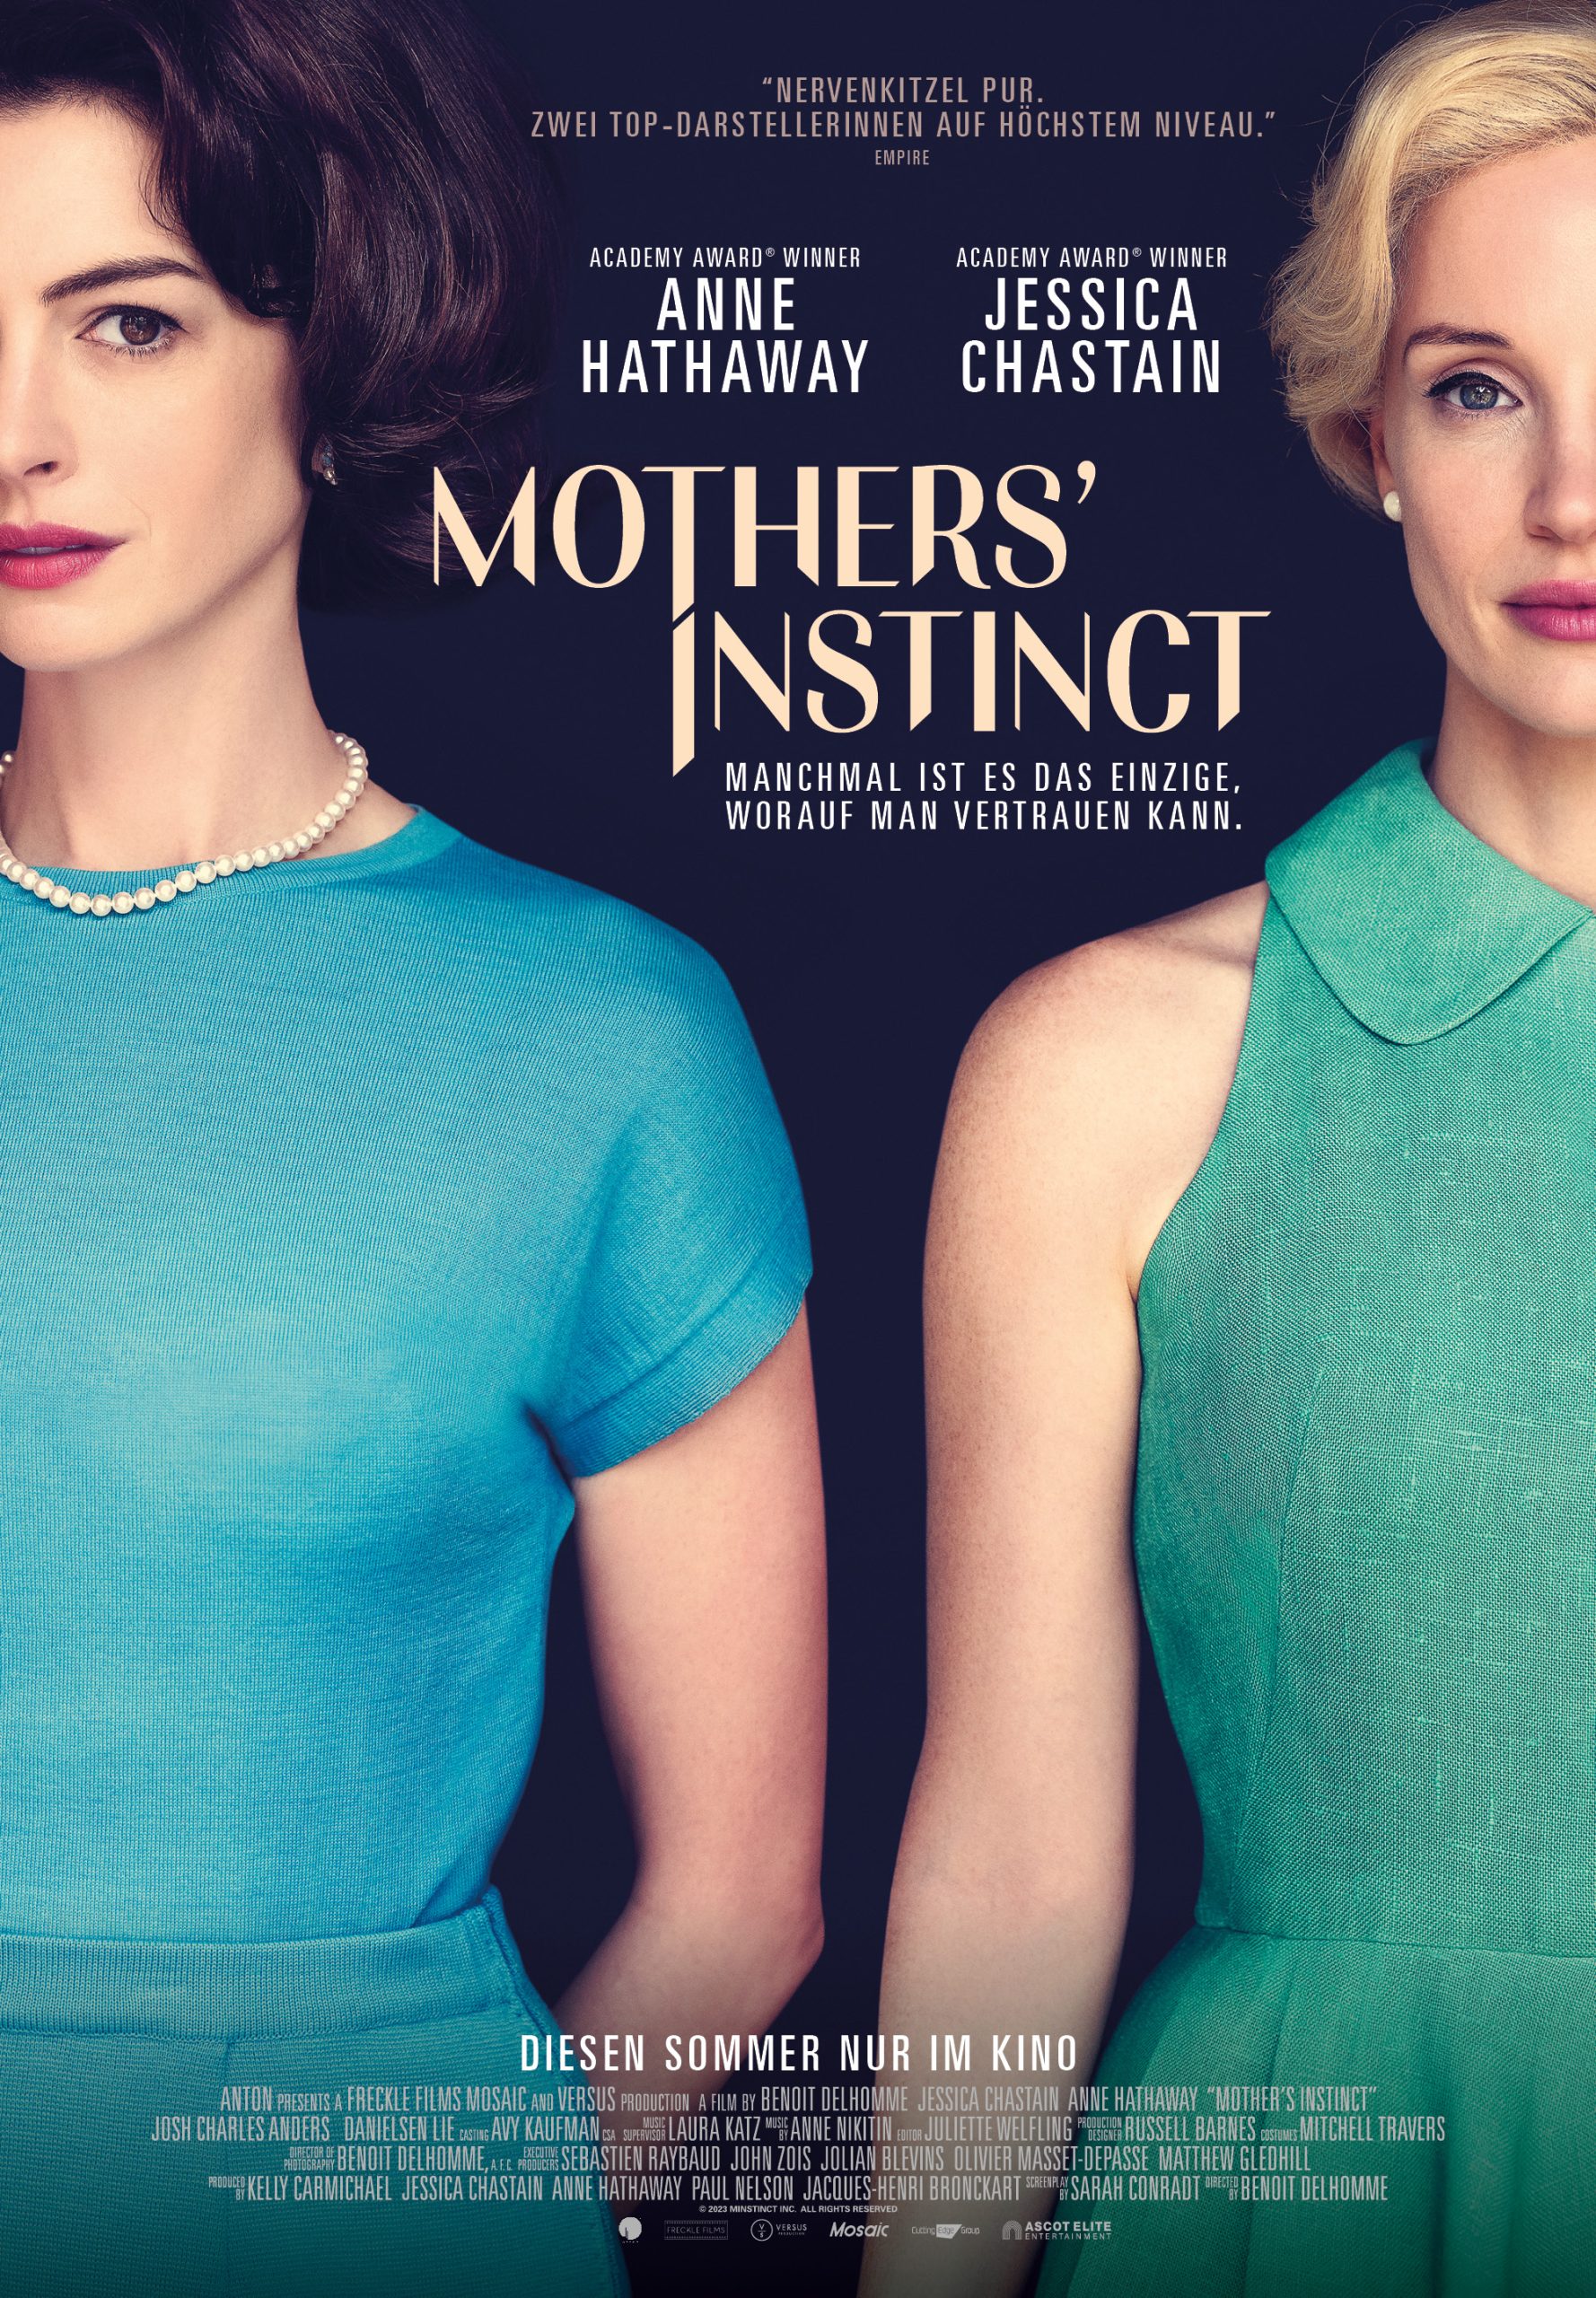 Movie poster of "Mother's Instinct" featuring Anne Hathaway and Jessica Chastain in elegant dresses